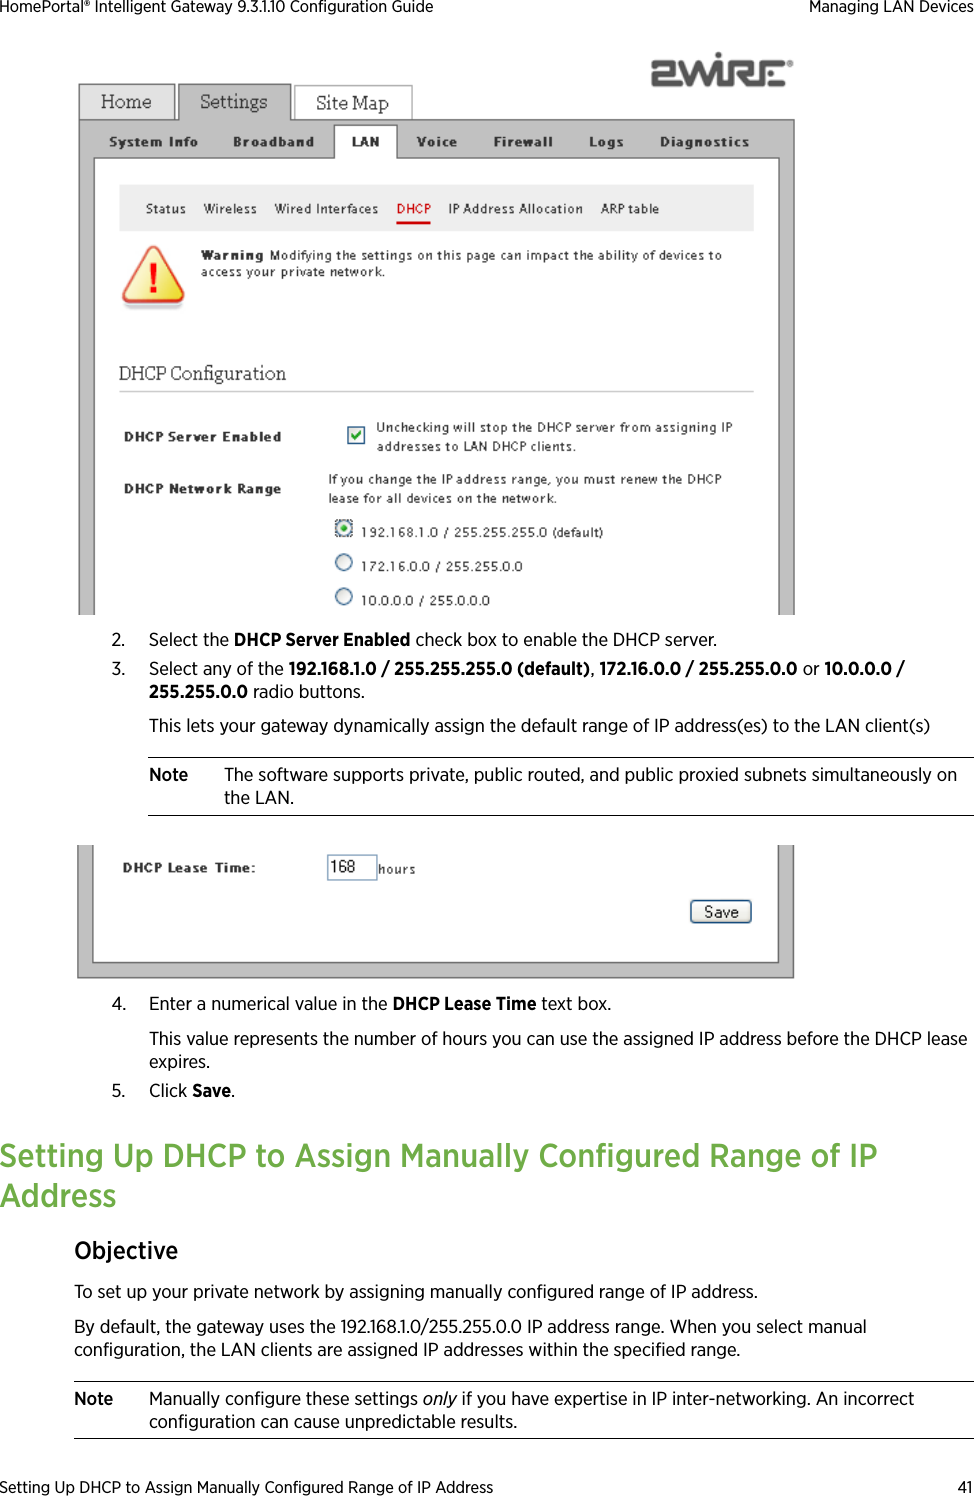 Setting Up DHCP to Assign Manually Configured Range of IP Address 41HomePortal® Intelligent Gateway 9.3.1.10 Configuration Guide Managing LAN Devices2. Select the DHCP Server Enabled check box to enable the DHCP server.3. Select any of the 192.168.1.0 / 255.255.255.0 (default), 172.16.0.0 / 255.255.0.0 or 10.0.0.0 / 255.255.0.0 radio buttons.This lets your gateway dynamically assign the default range of IP address(es) to the LAN client(s)Note The software supports private, public routed, and public proxied subnets simultaneously on the LAN. 4. Enter a numerical value in the DHCP Lease Time text box. This value represents the number of hours you can use the assigned IP address before the DHCP lease expires.5. Click Save. Setting Up DHCP to Assign Manually Configured Range of IP AddressObjectiveTo set up your private network by assigning manually configured range of IP address.By default, the gateway uses the 192.168.1.0/255.255.0.0 IP address range. When you select manual configuration, the LAN clients are assigned IP addresses within the specified range.Note Manually configure these settings only if you have expertise in IP inter-networking. An incorrect configuration can cause unpredictable results.